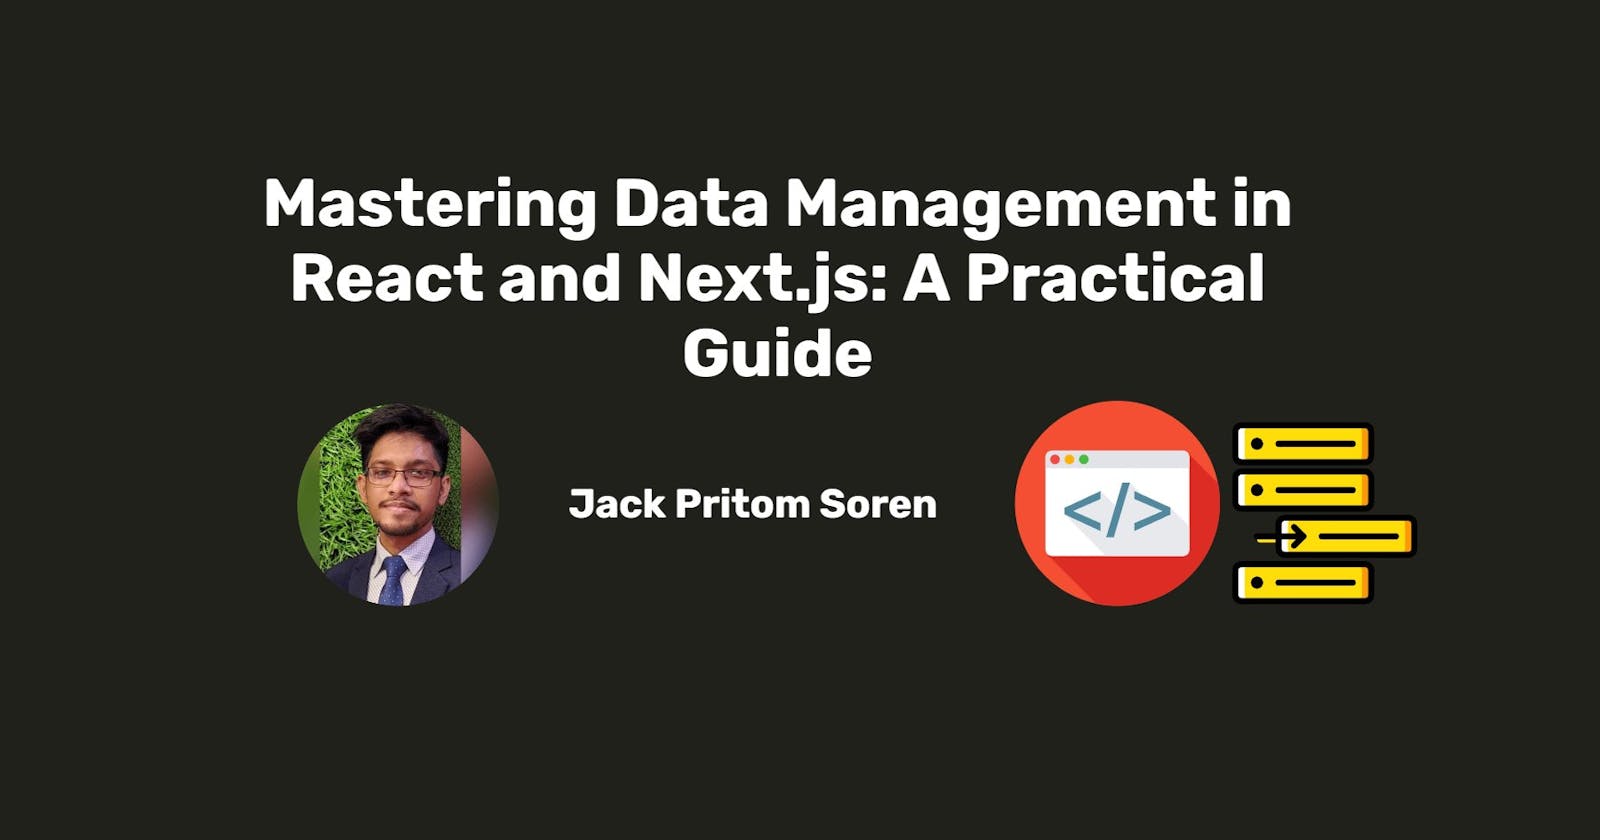 Mastering Data Management in React and Next.js: A Practical Guide